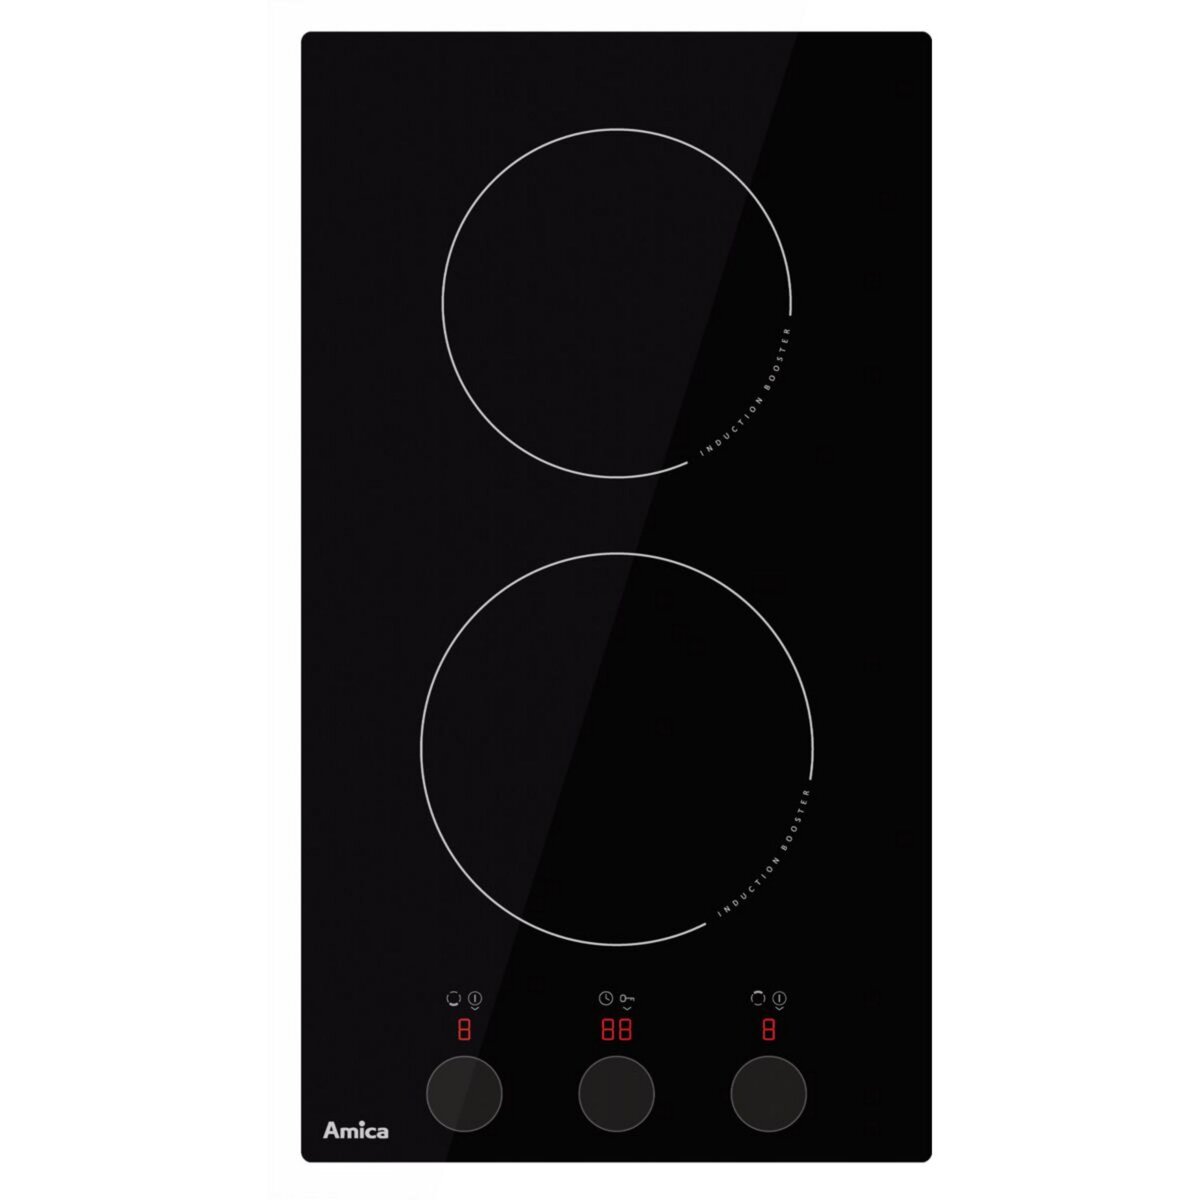 Amica Domino induction AIM2520T